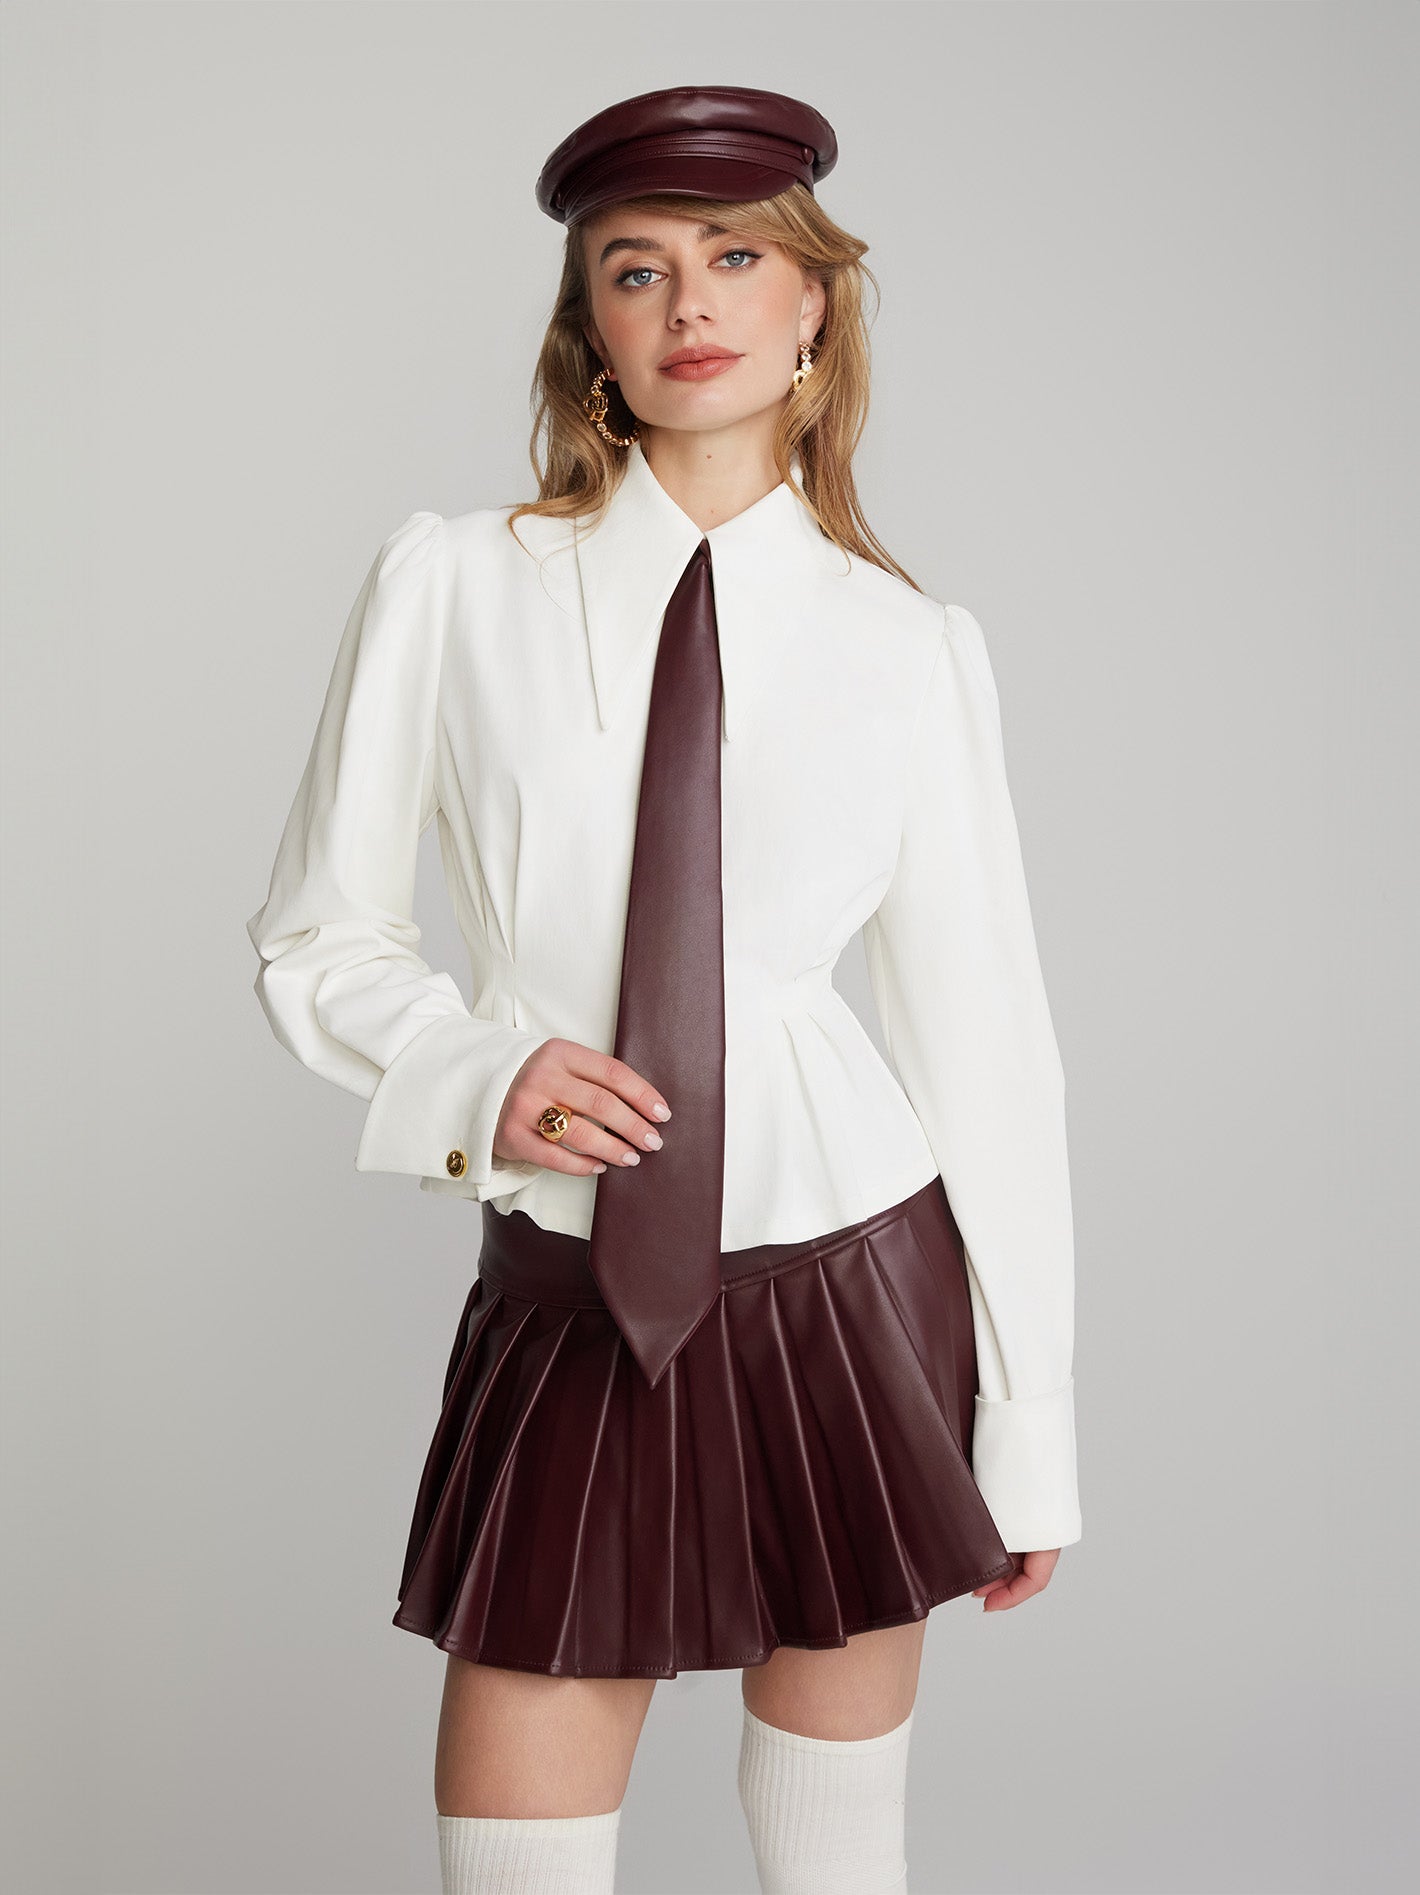 Mirabel Faux Leather Skirt (Brown)